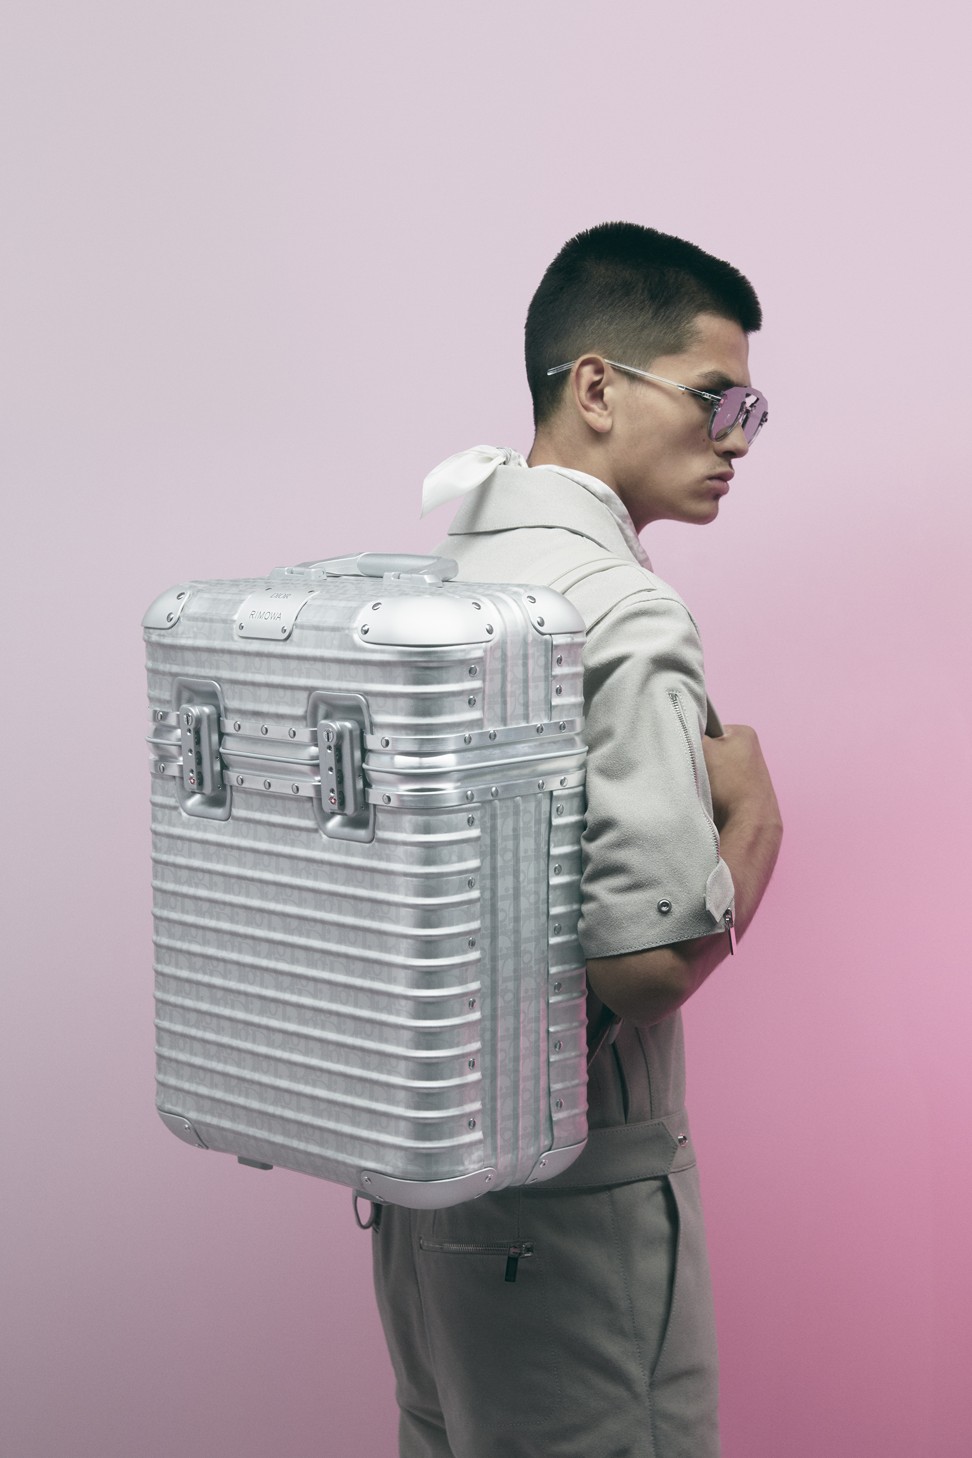 Rimowa CEO and son of LVMH head on luxury luggage brand's revamp